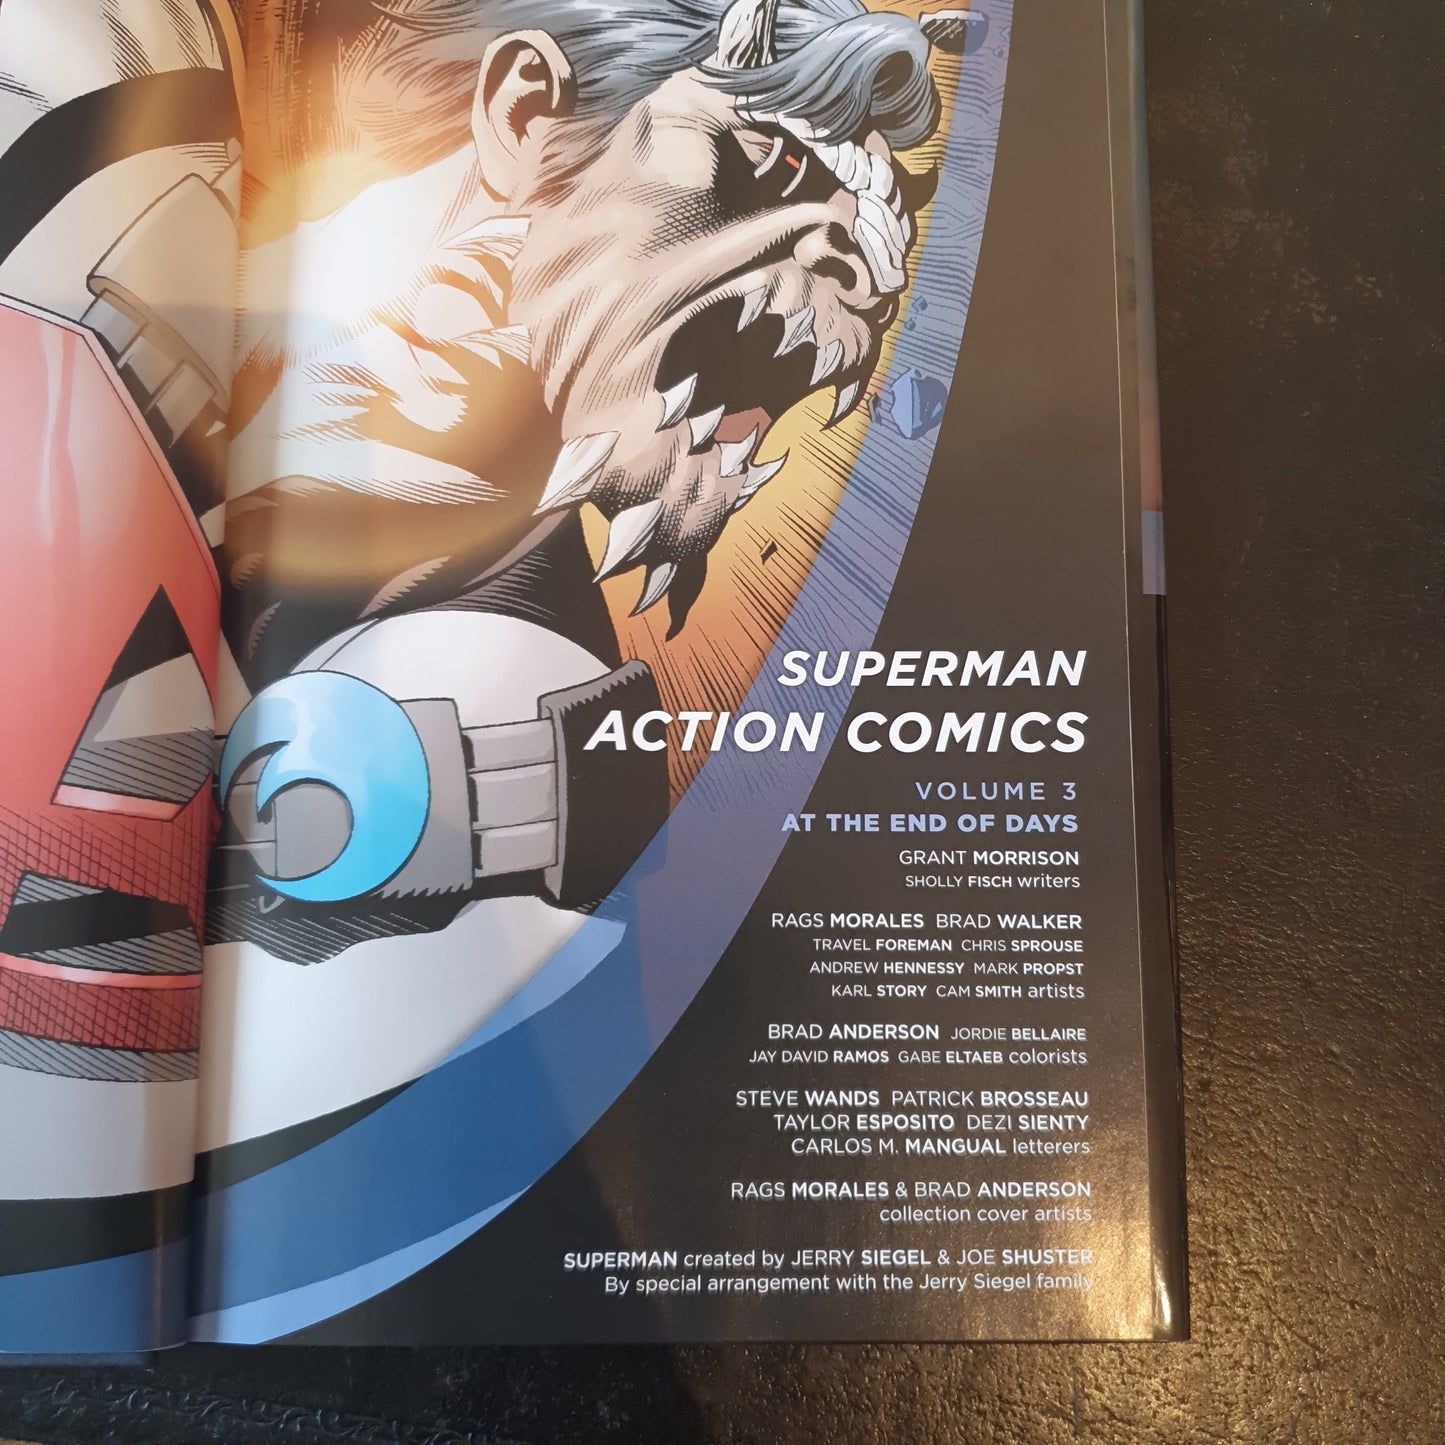 Superman Action Comics Vol 3 At the End of Days by Morrison, Morales & Walker (2013)